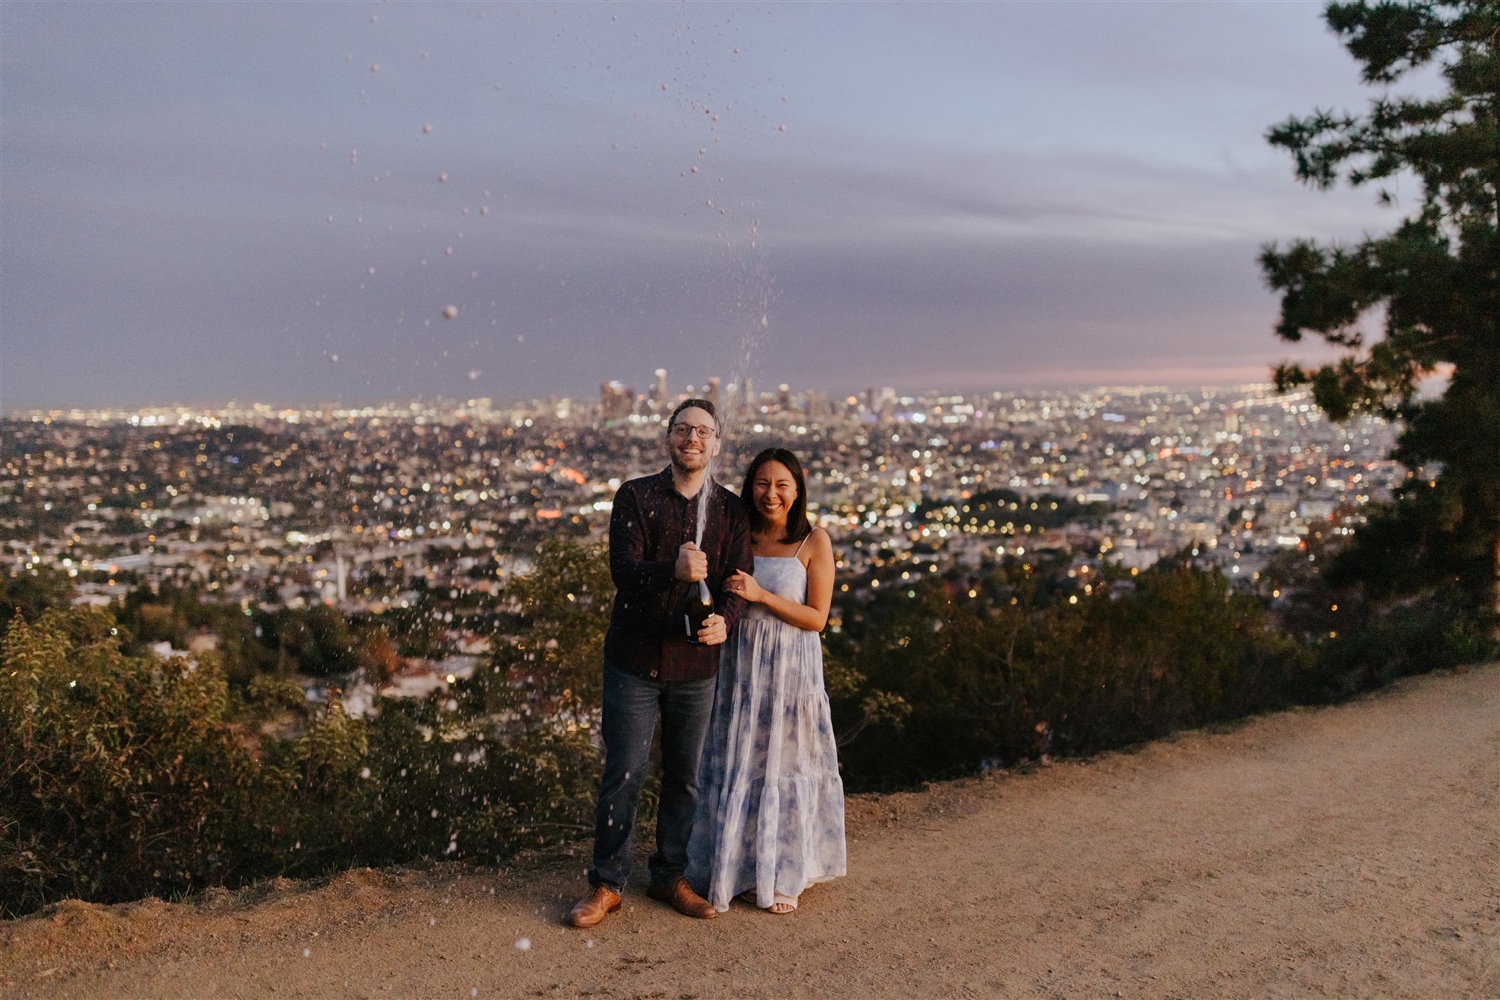 Los Angeles sunset engagement photos at Griffith Observatory